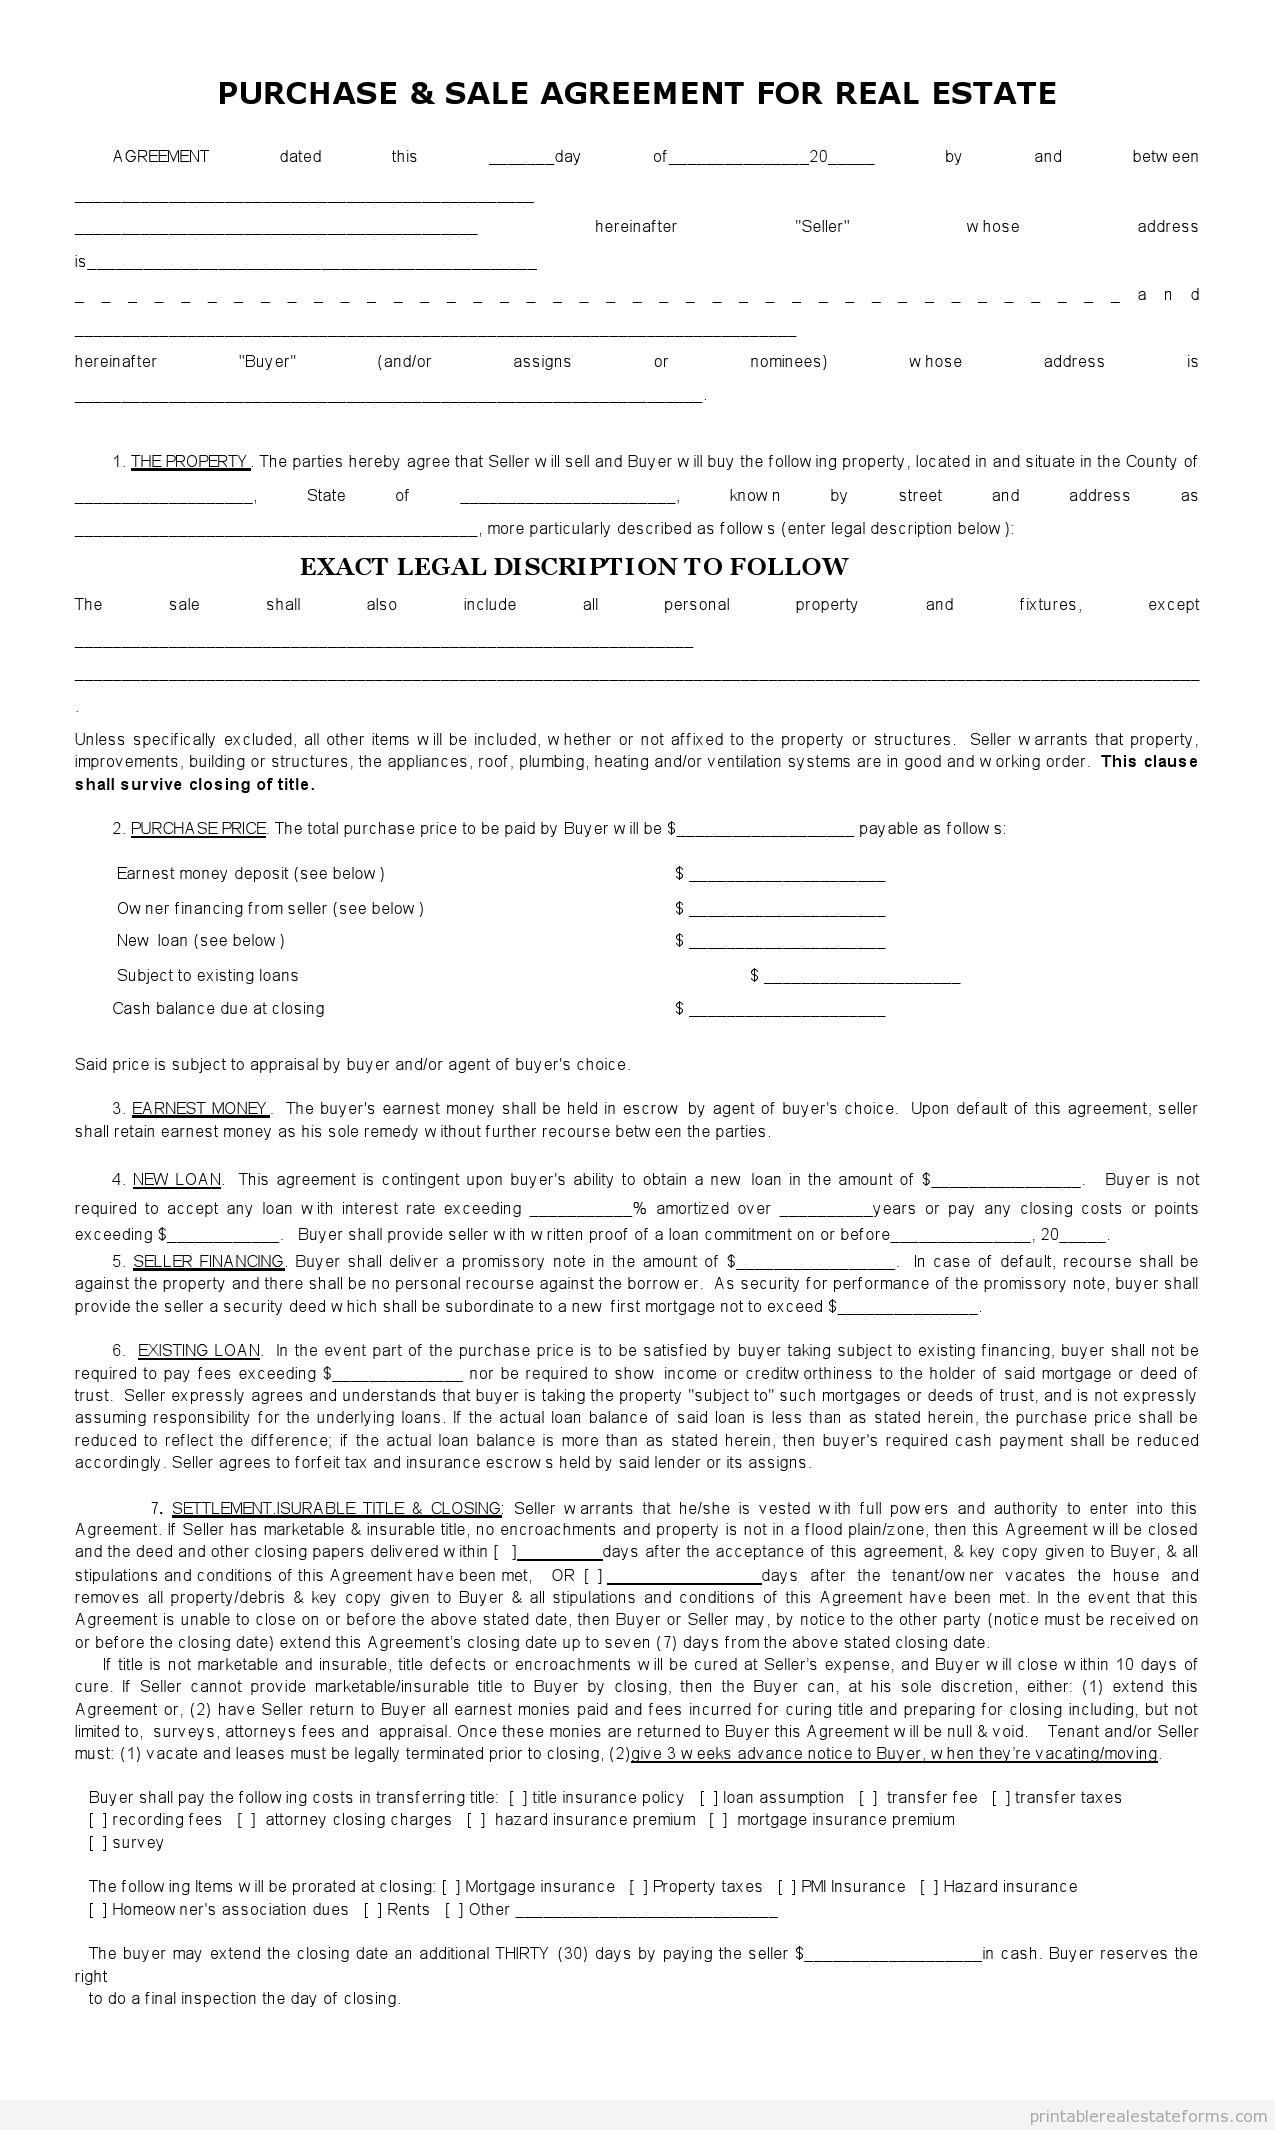 Sample Printable Sales Contract For Buying Subject 2 Form | Sample - Free Printable Real Estate Purchase Agreement